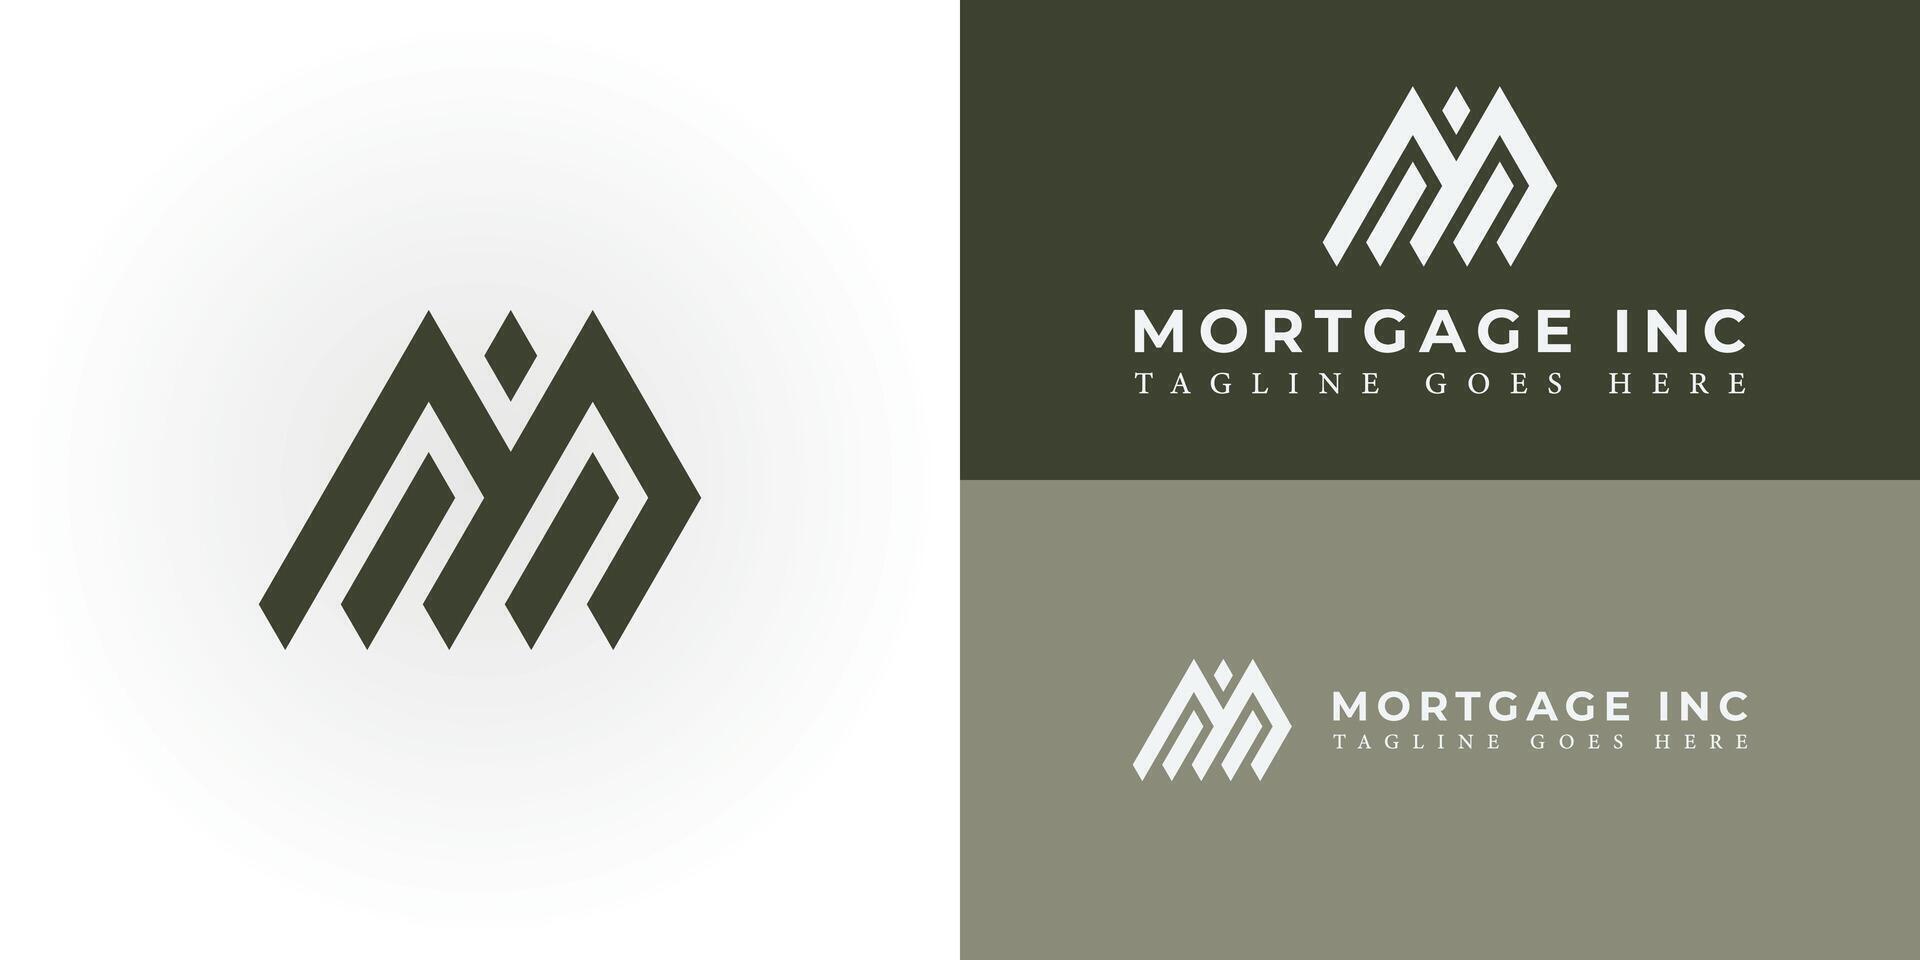 Abstract letter MI or IM lines art mountain abstract geometric logo vector in green color isolated on multiple white and green backgrounds applied for real estate logo design inspiration template